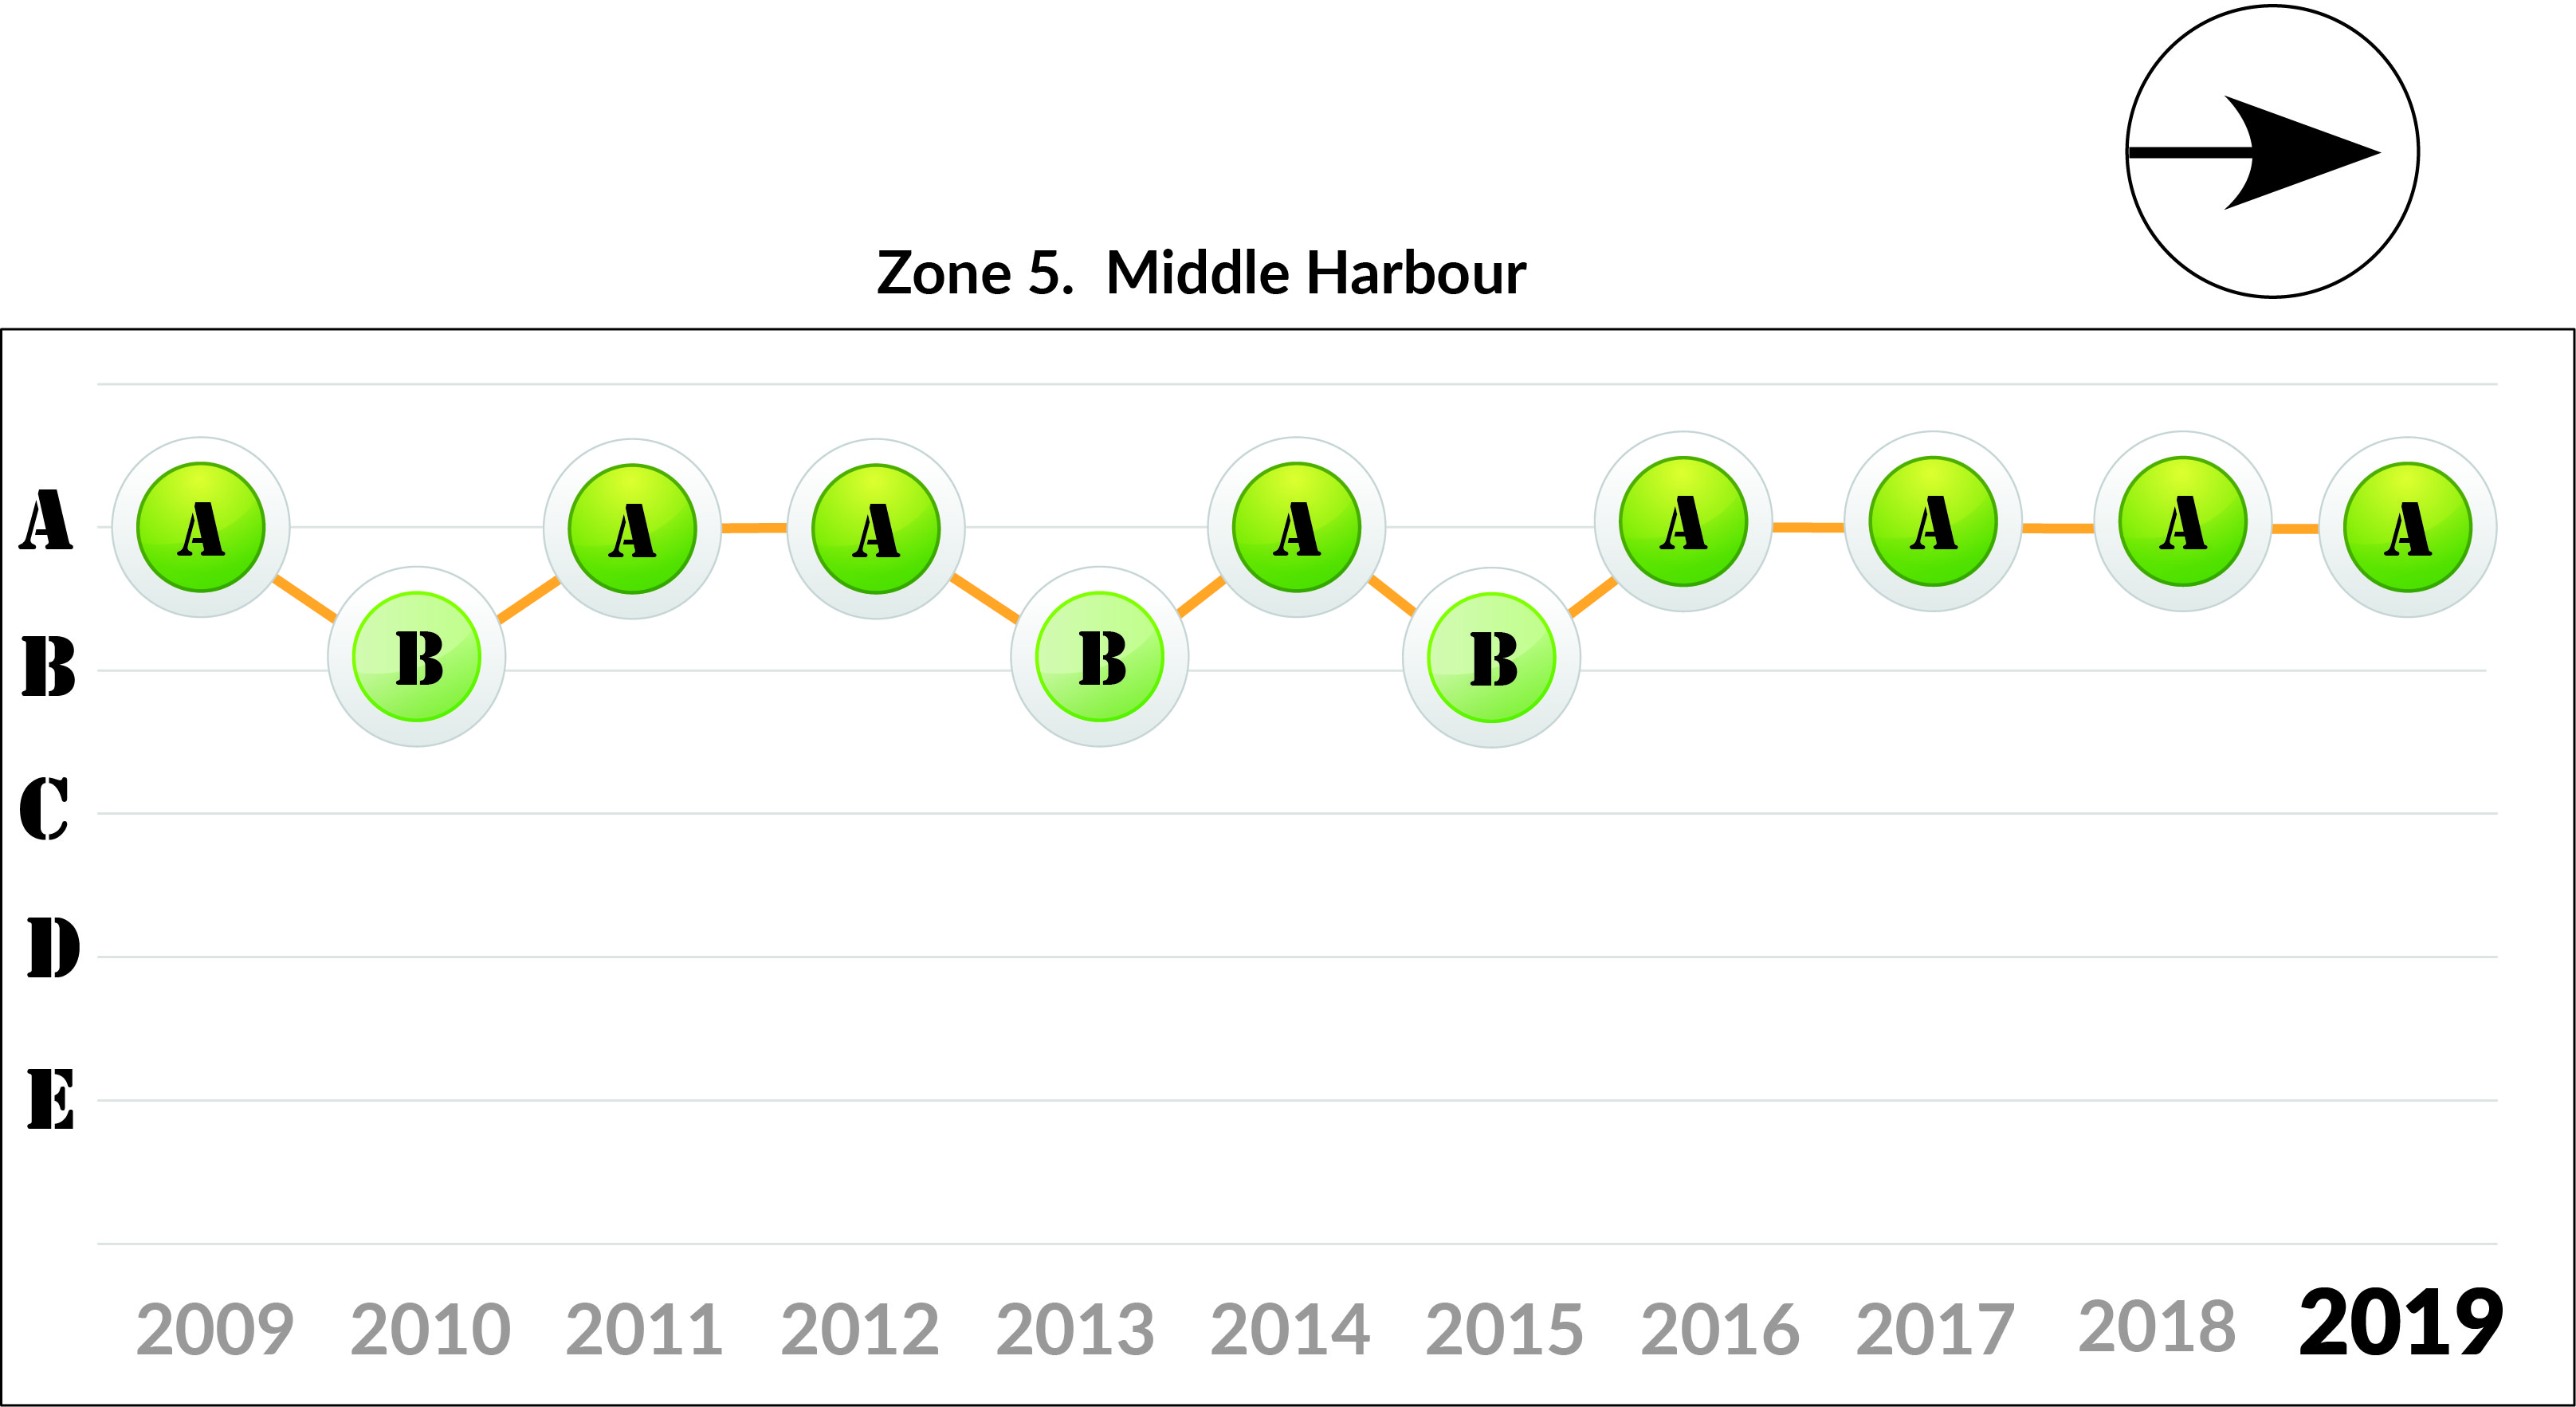 Zone 5 Middle Harbour trends